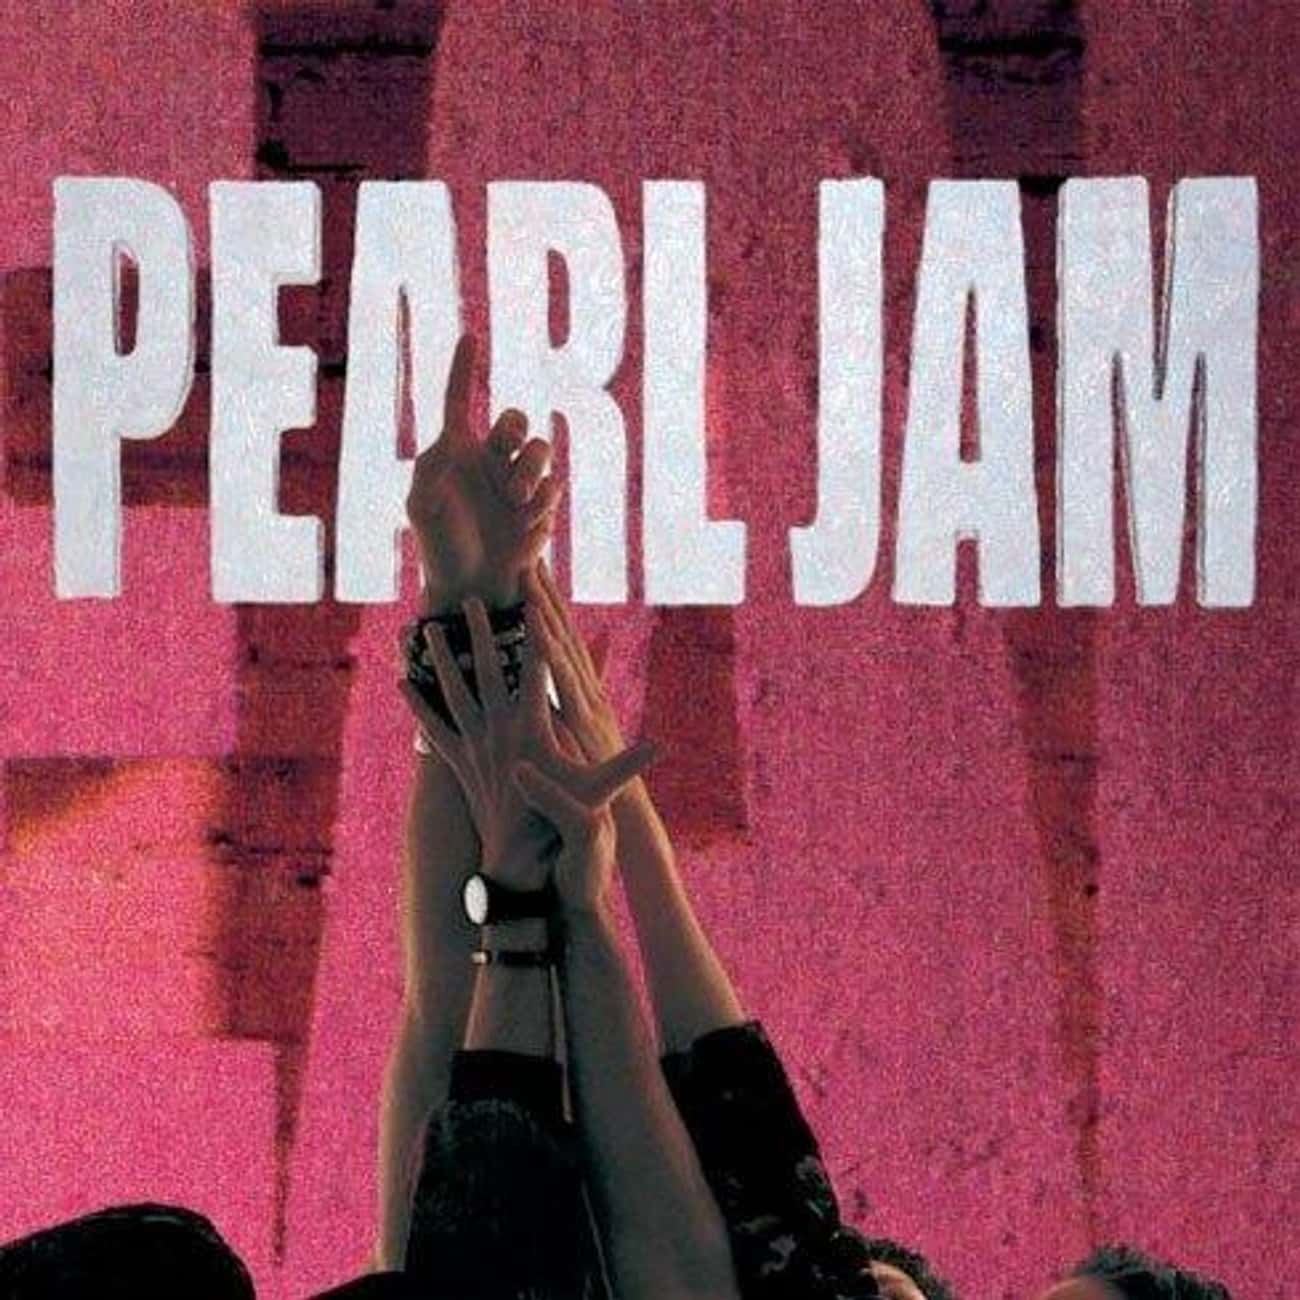 All Pearl Jam Albums, Ranked Best To Worst By Fans